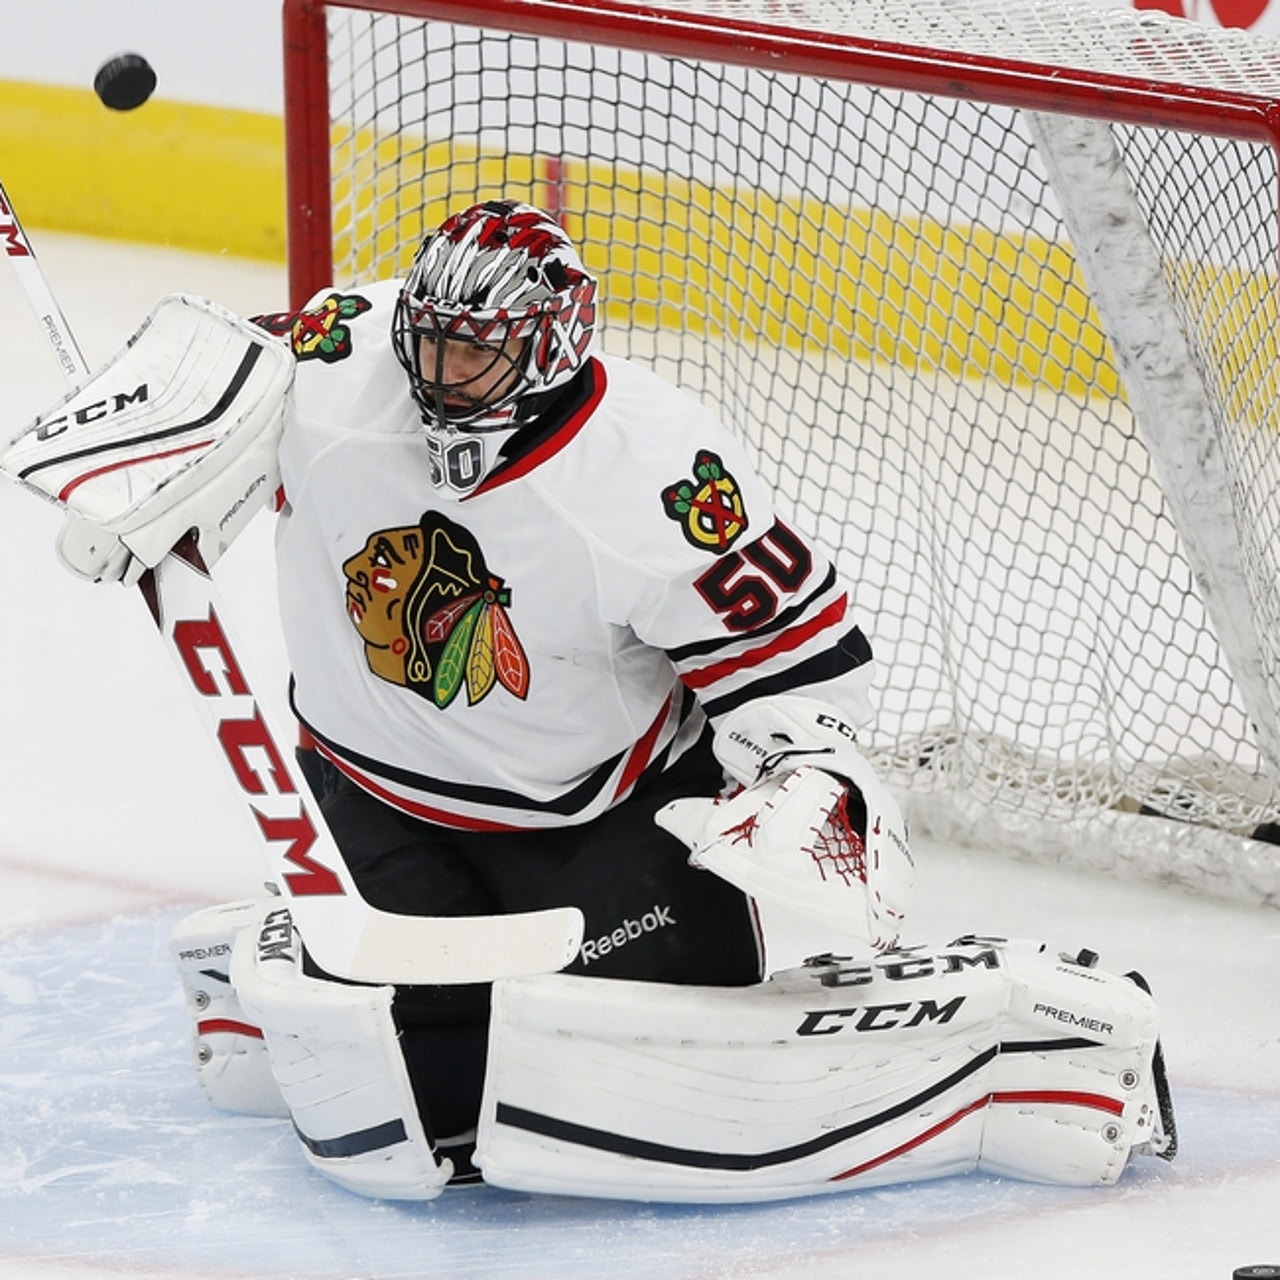 Blackhawks beat Sharks, 4-2, to reach Stanley Cup finals for first time  since 1992 